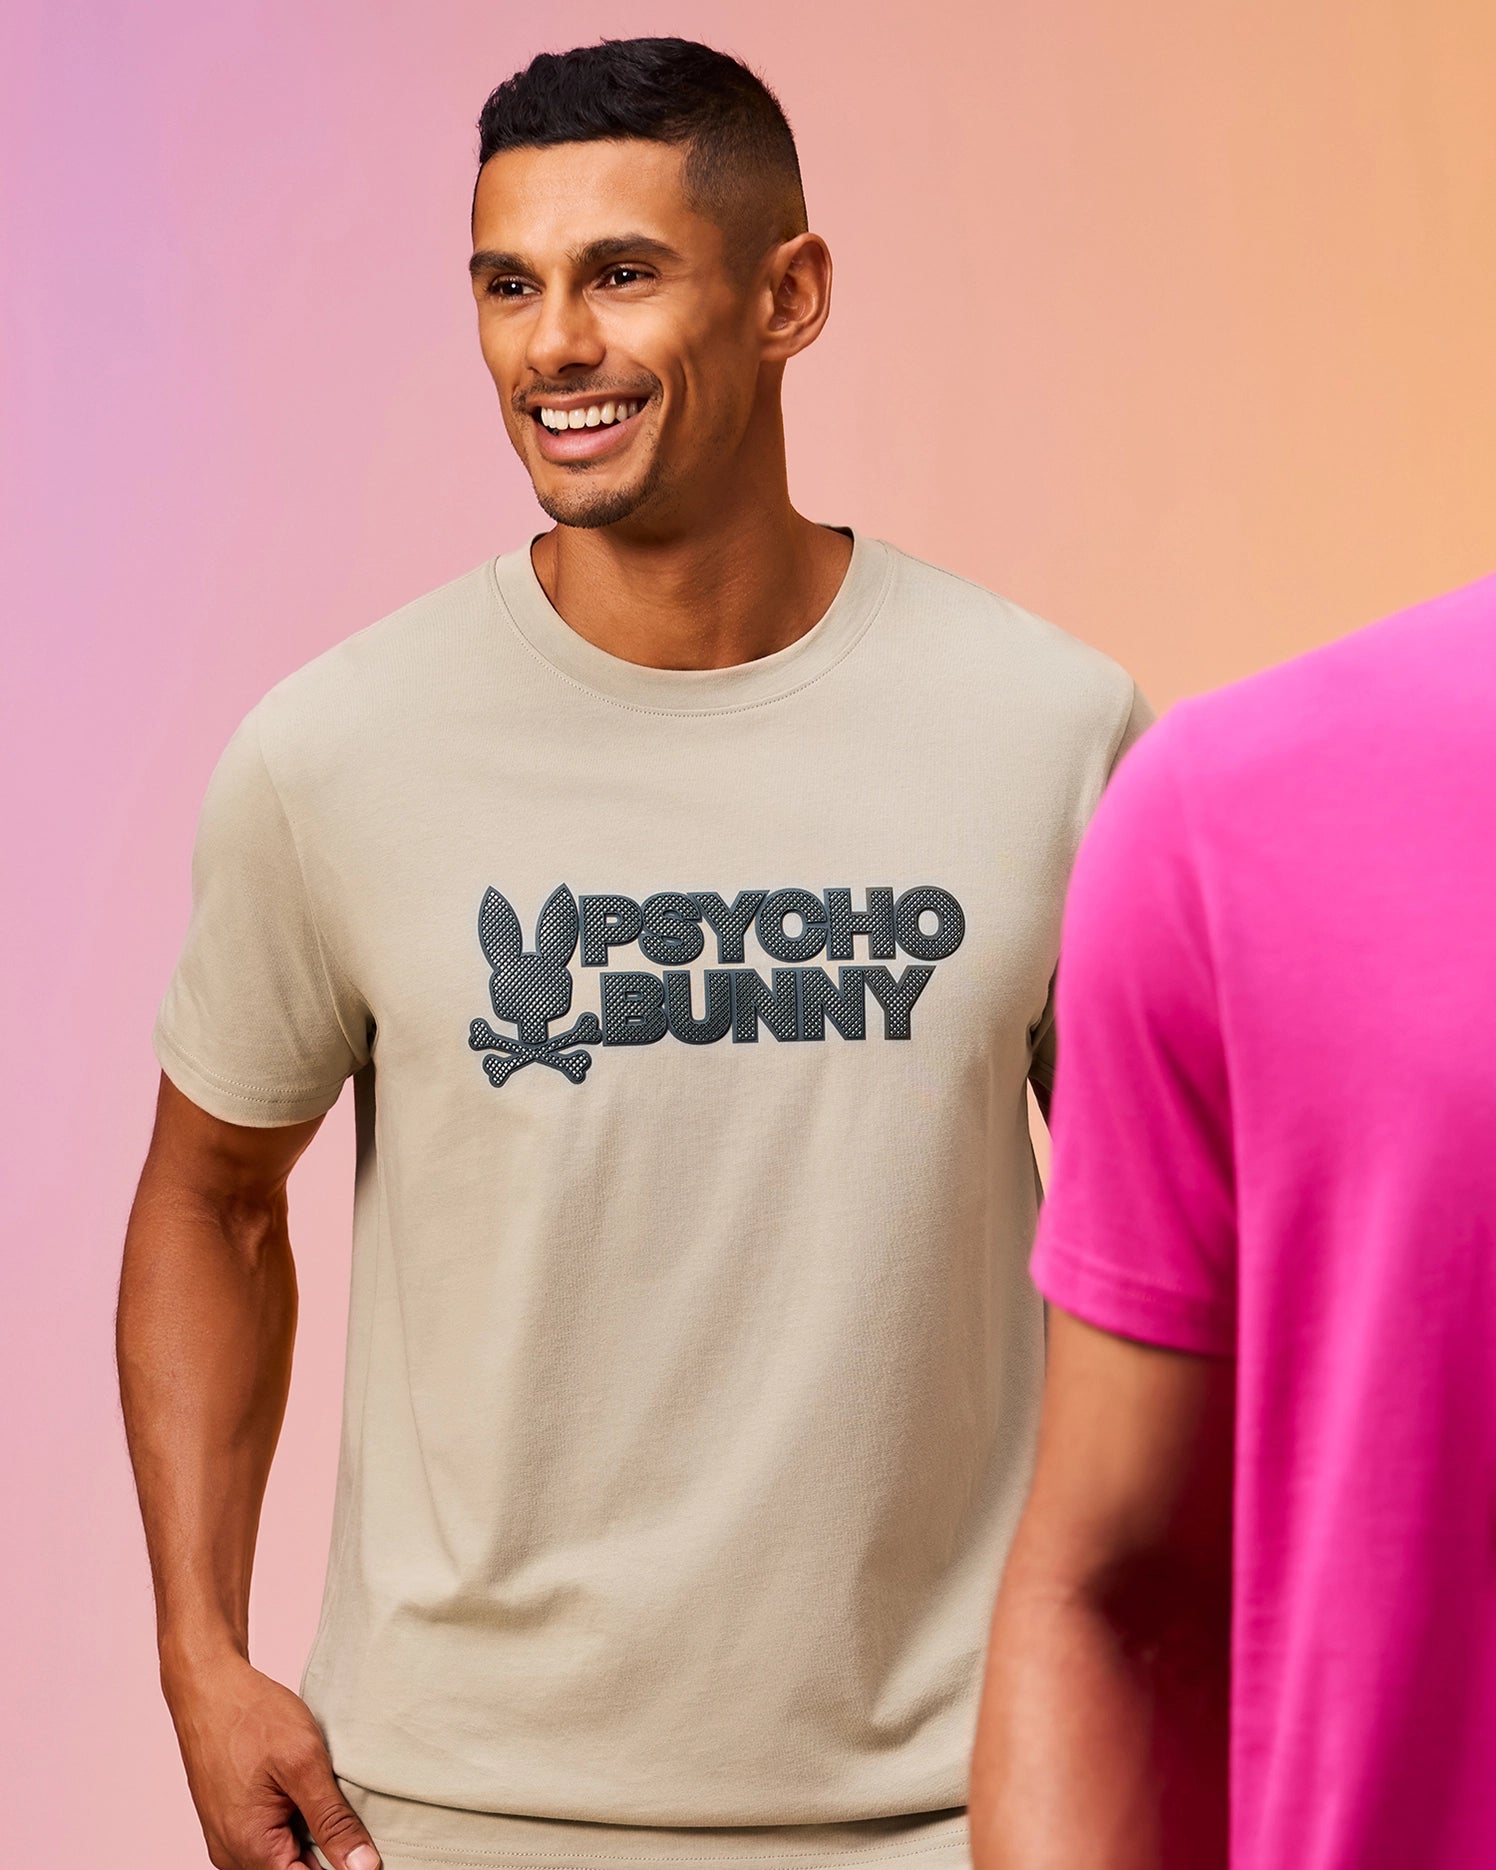 A man with short hair is smiling and wearing a light beige MENS MELVIN GRAPHIC TEE - B6U663C200 by Psycho Bunny, made of Pima cotton, featuring a large logo of a bunny and the text 